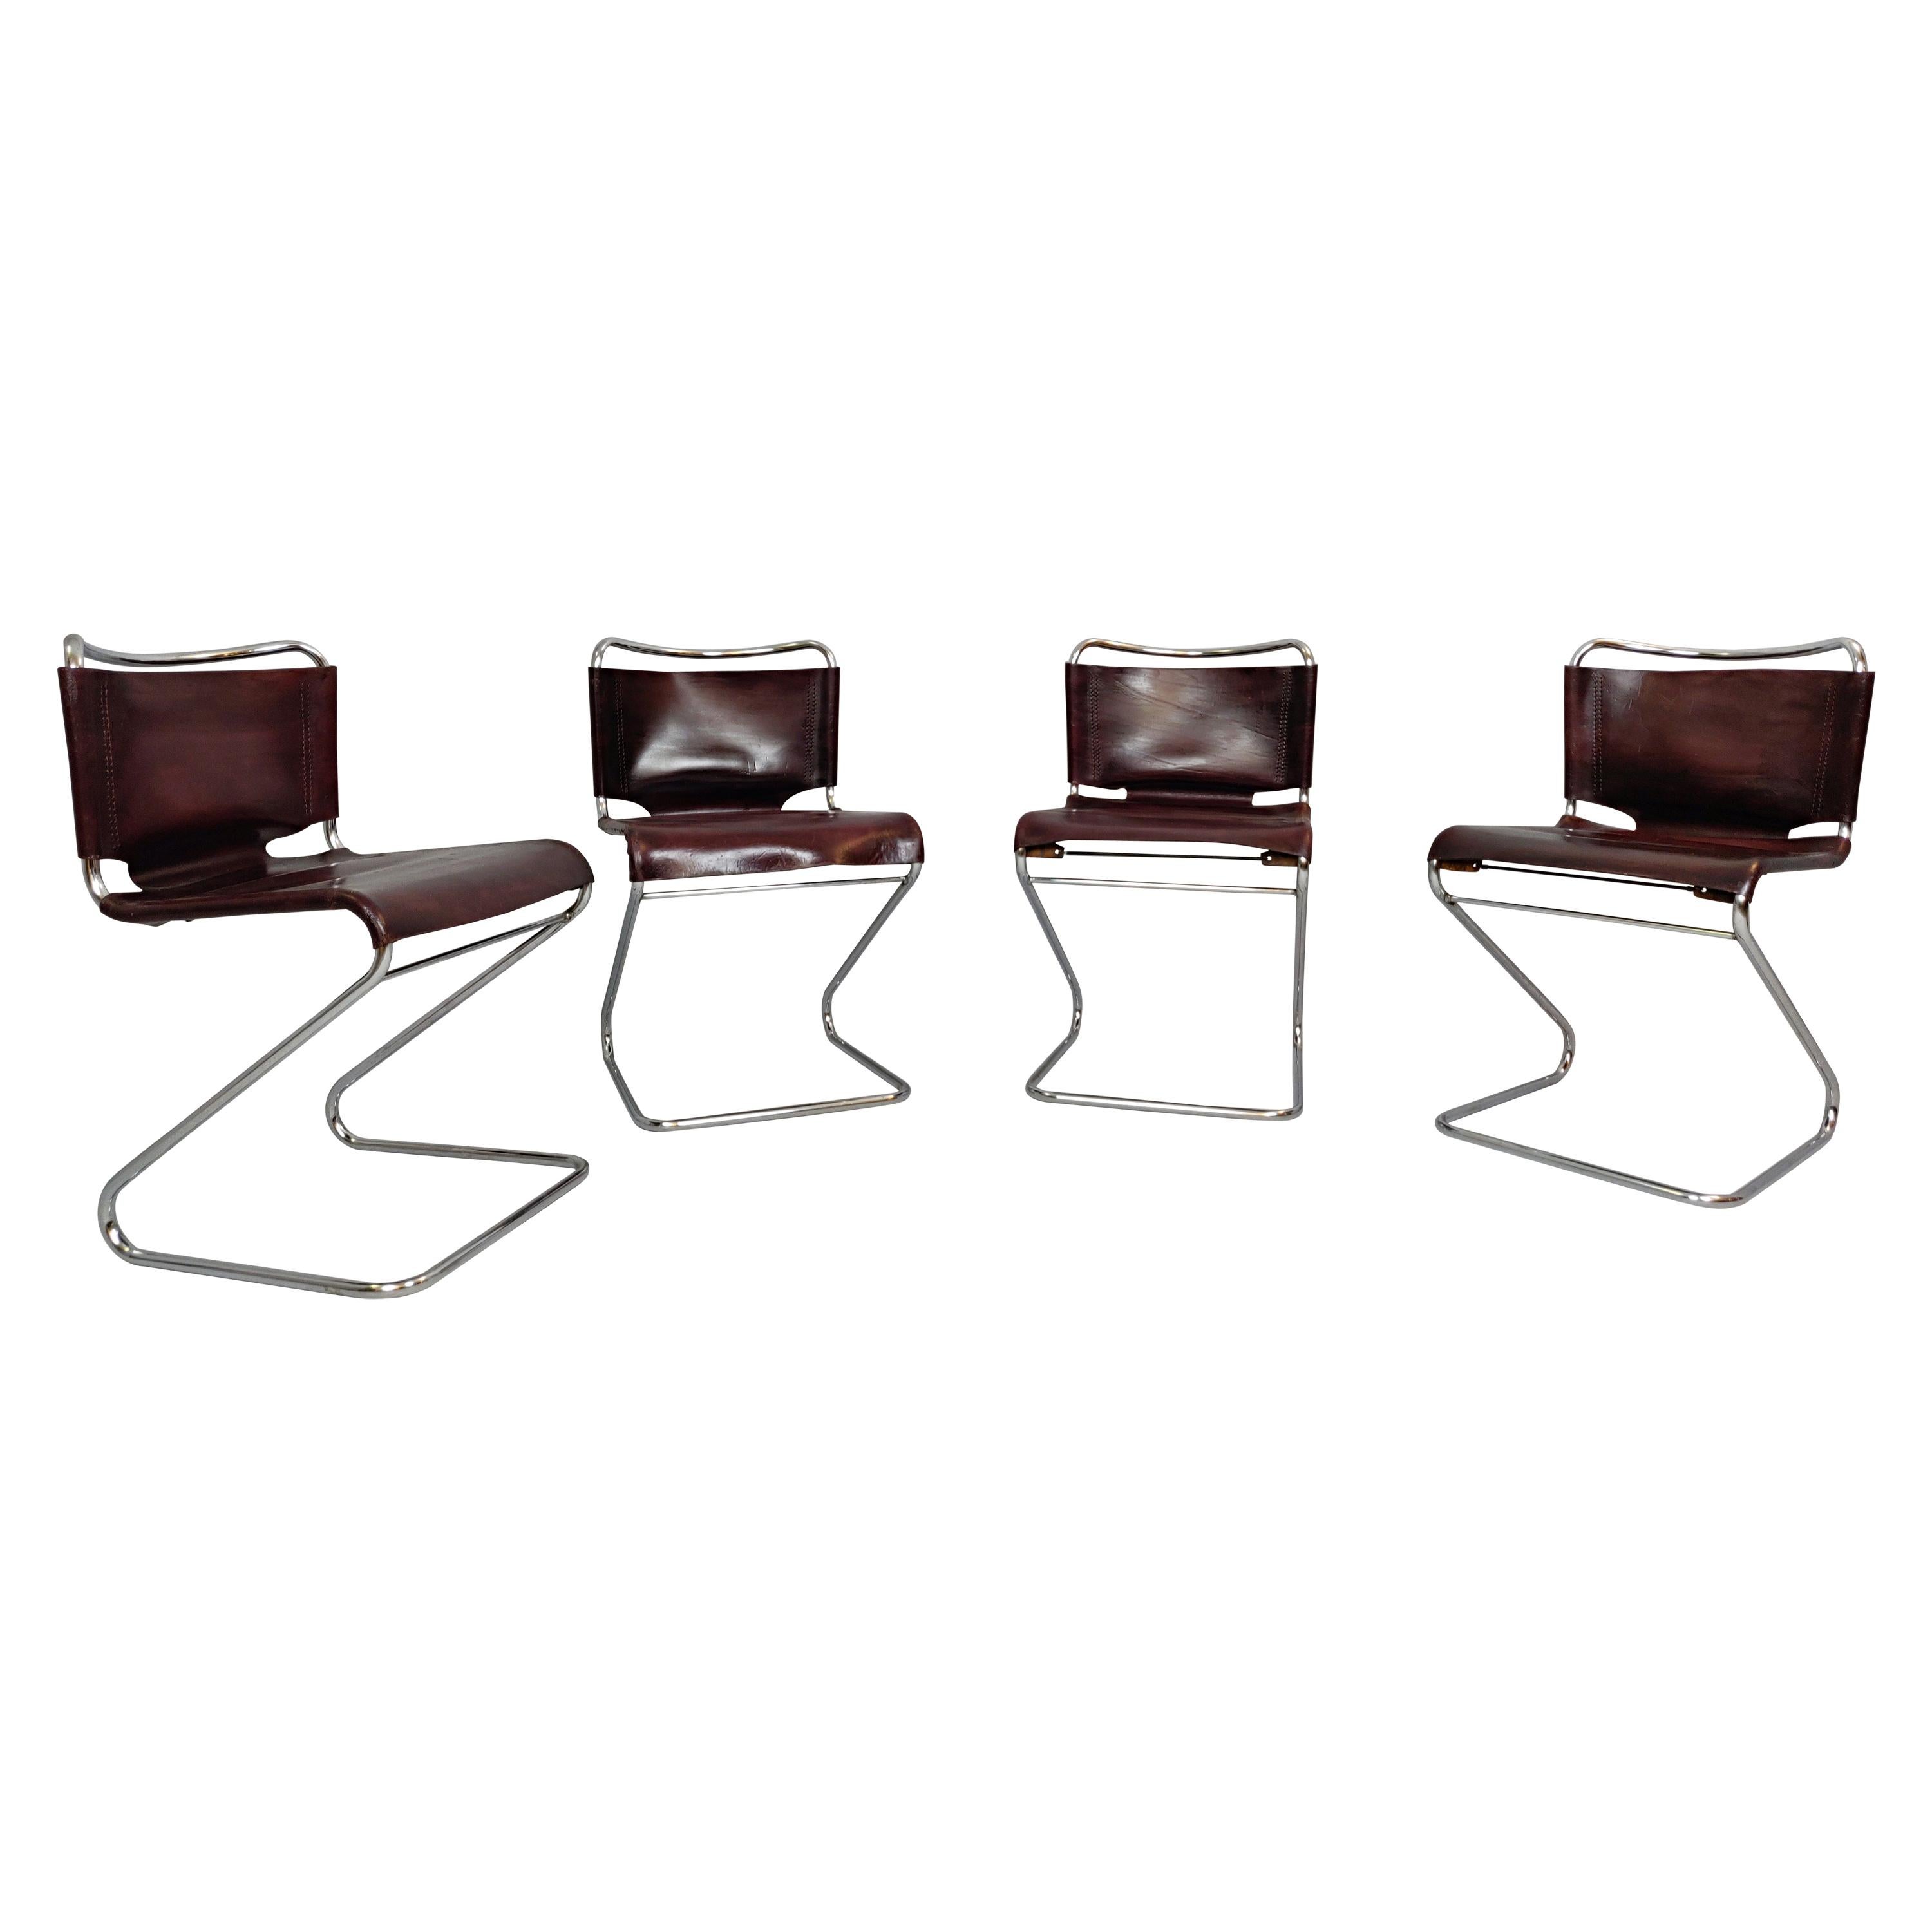 Set of Four Italian Leather and Tubular Chairs